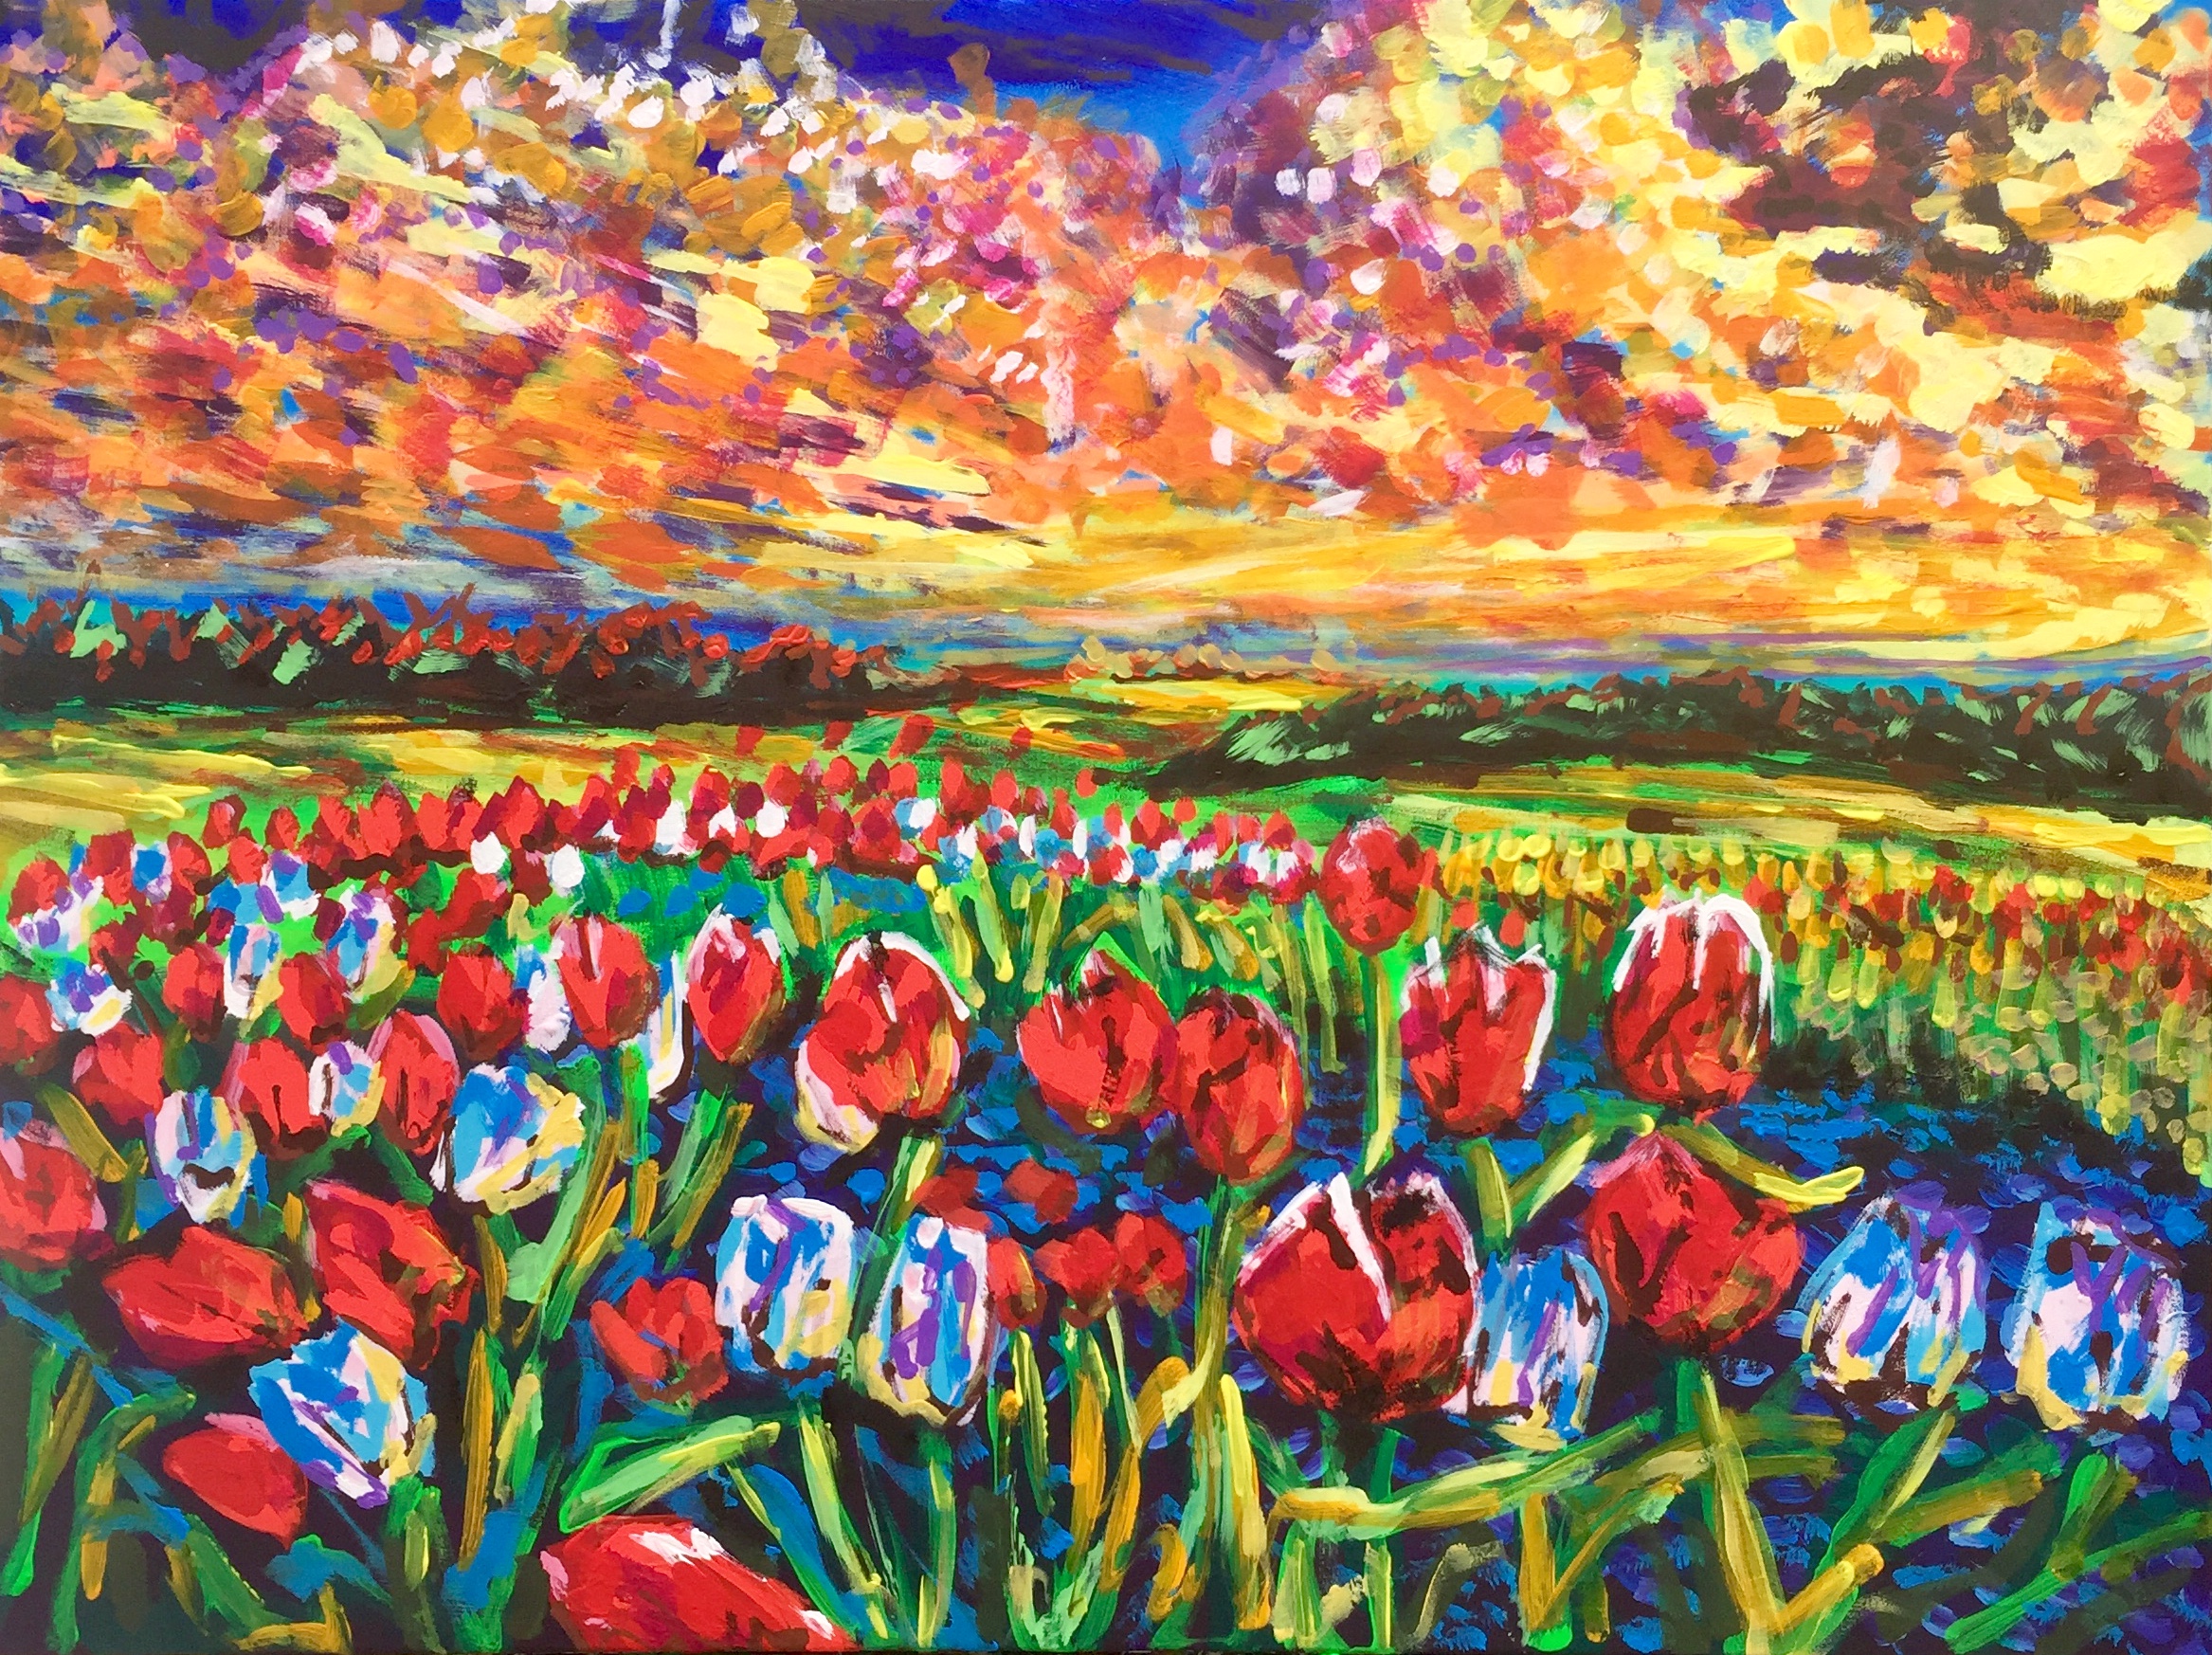 Field of poppies, acrylic on canvas, cm 60 xcm 80, 2019, occhiobello, private collections.